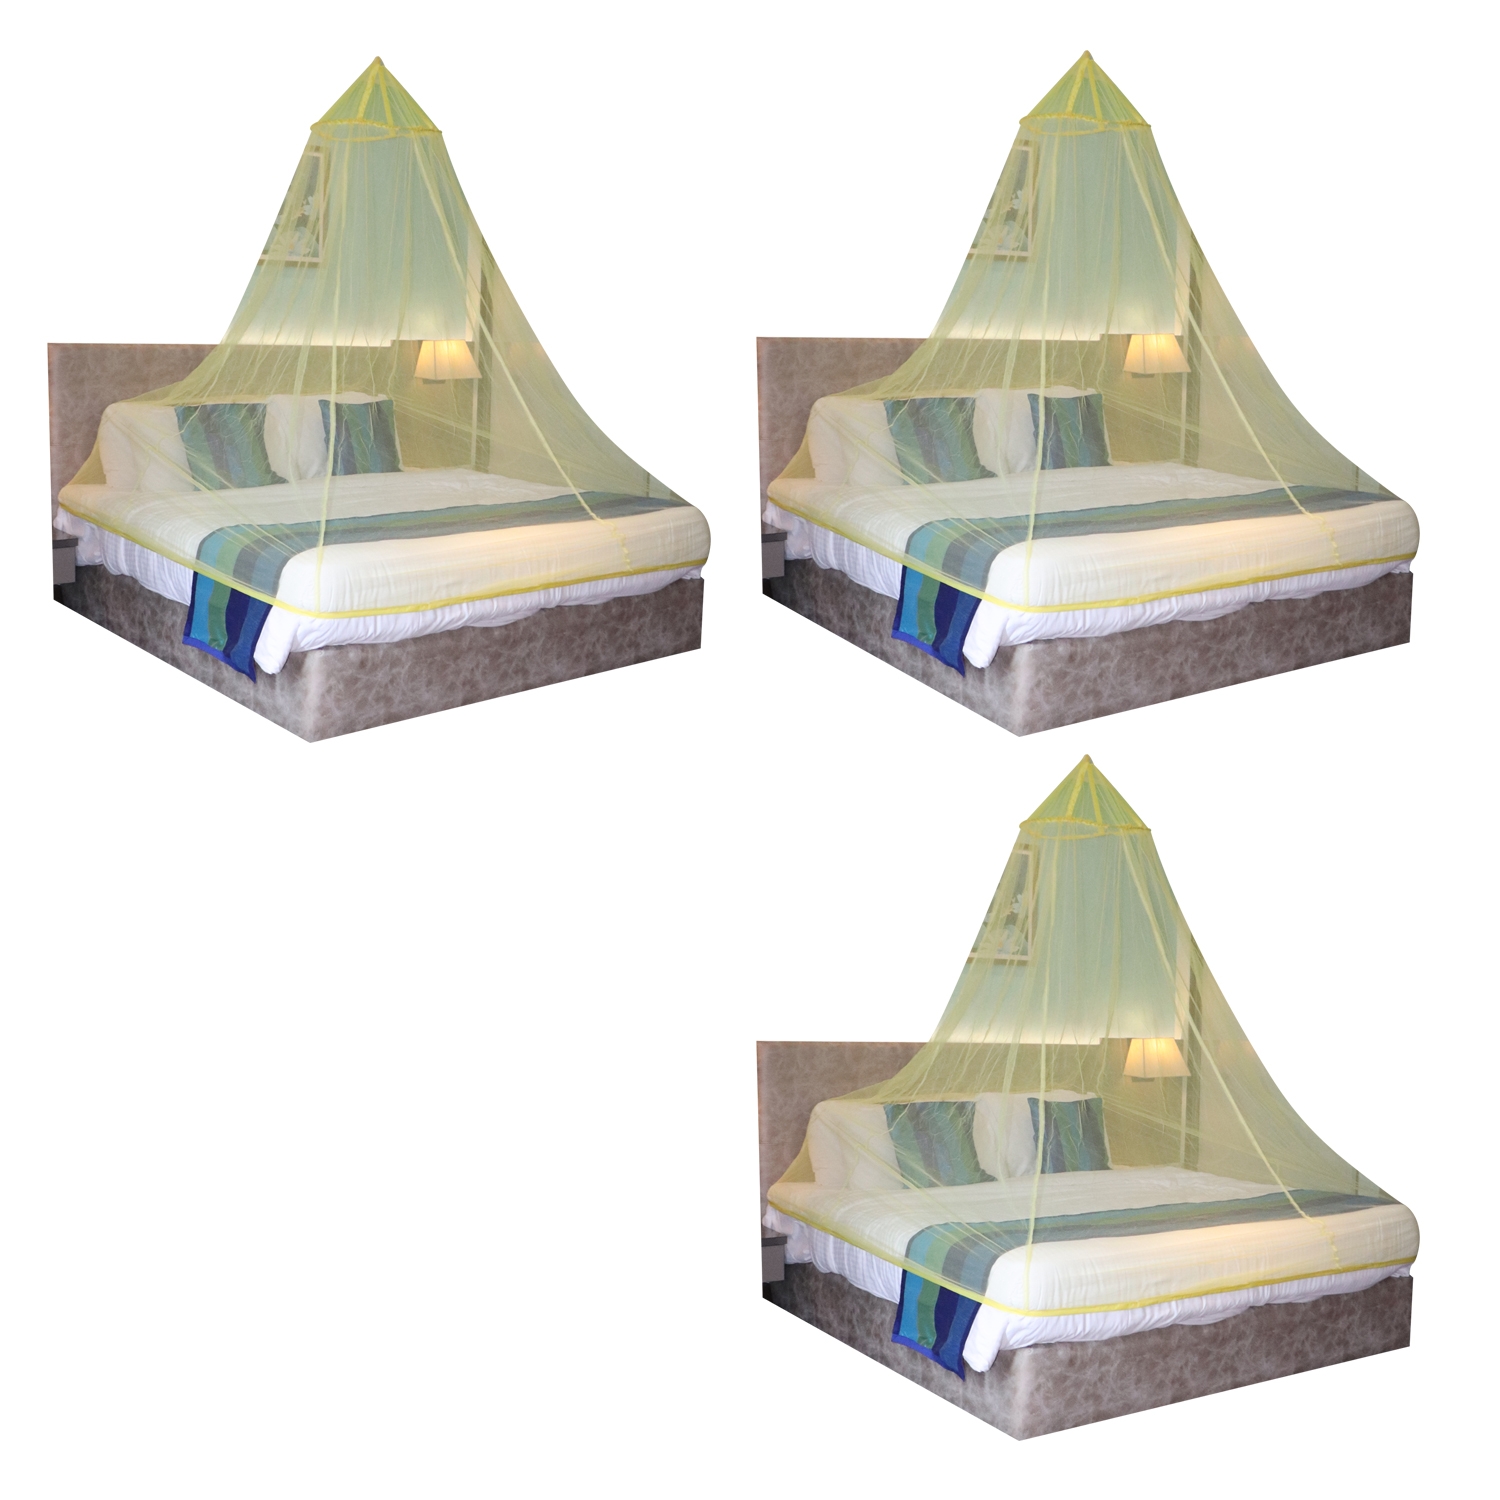 Mosquito Net for Double Bed, King-Size, Round Ceiling Hanging Foldable Polyester Net Yellow Pack 3 